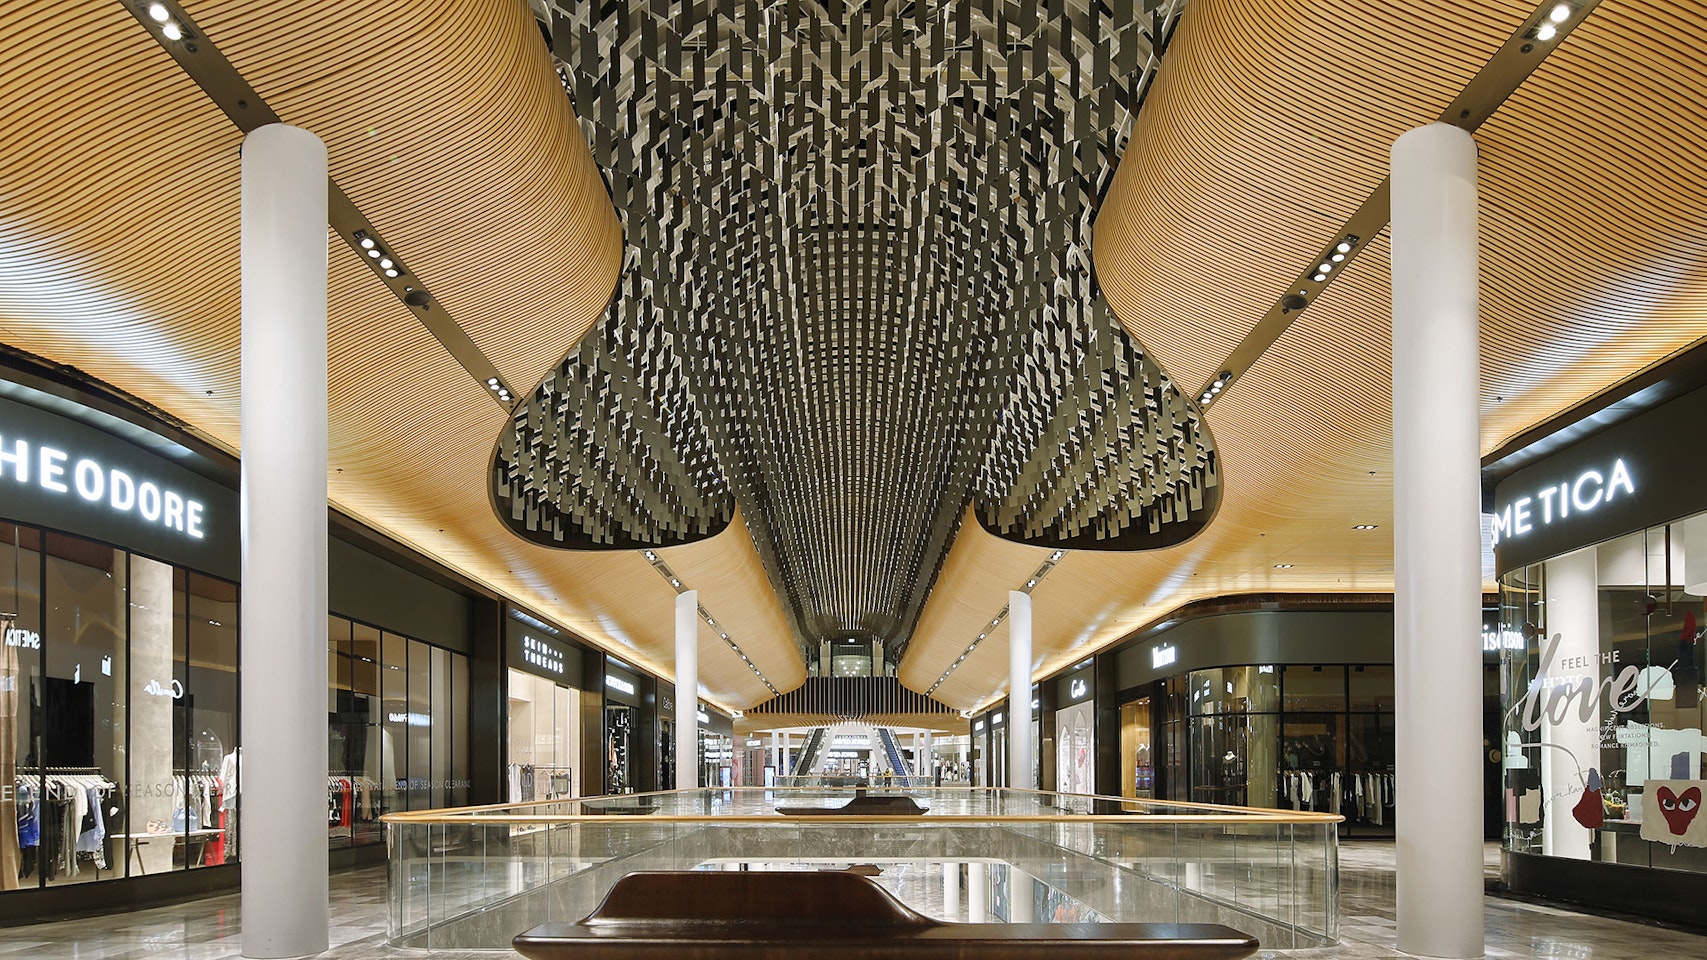 Multo versatile, compact LED strip in application, installed in Eastland Shopping Centre